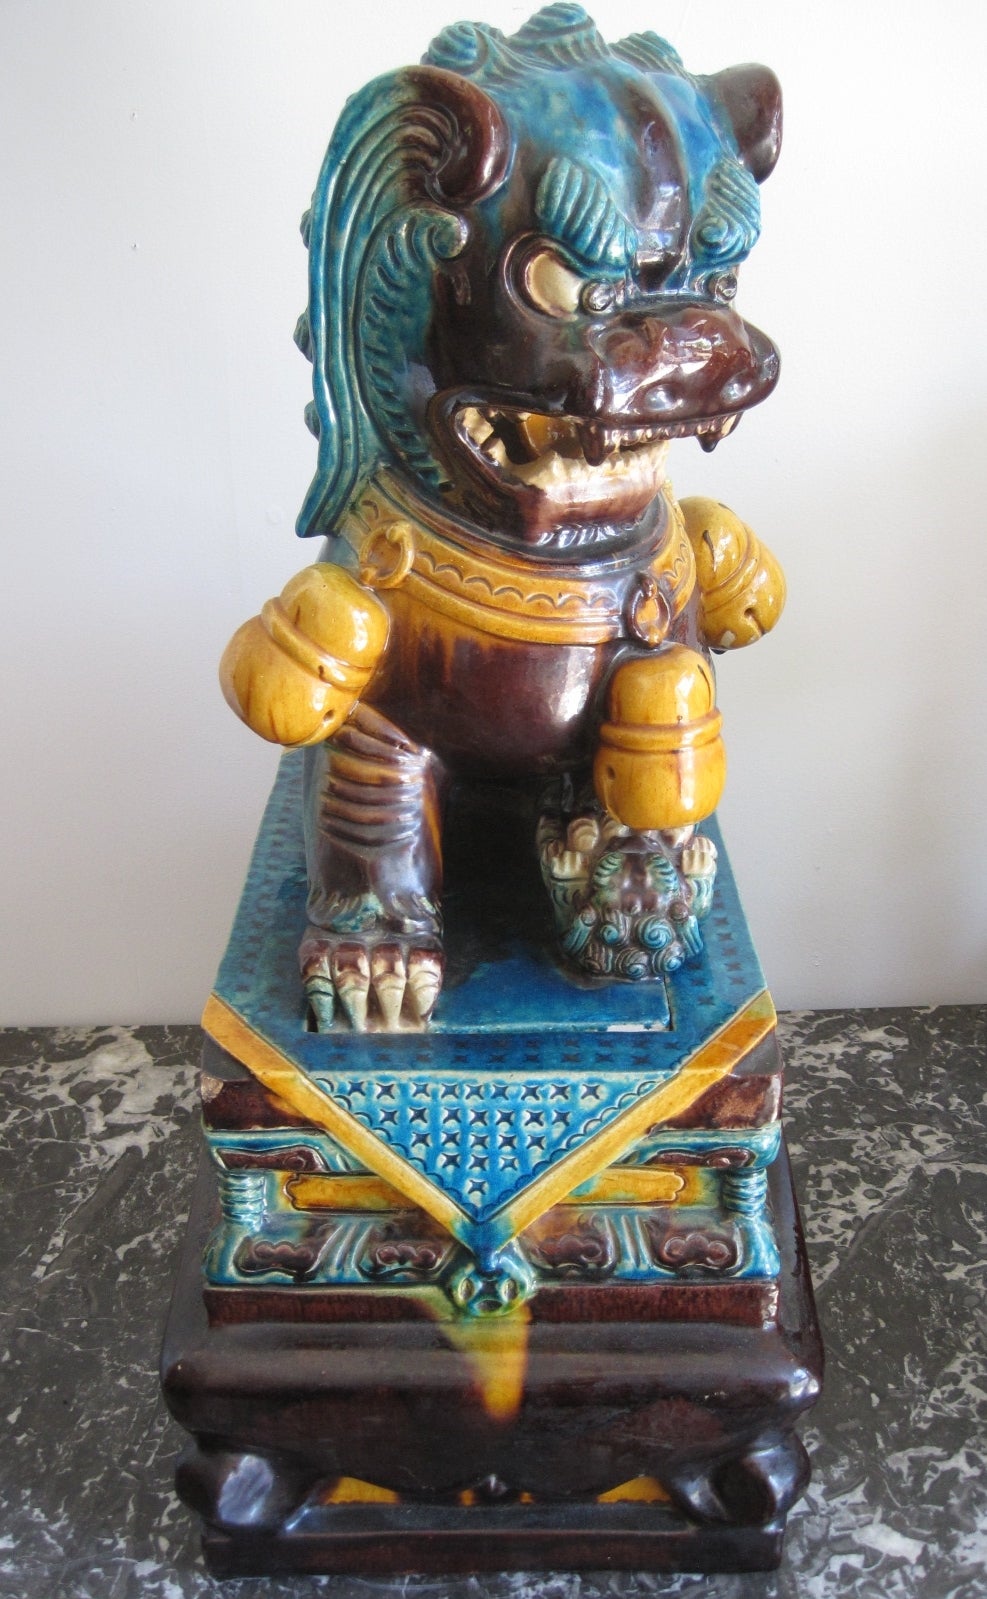 19th Century Chinese Porcelain Foo Dog on Pedestal

Statues of guardian lions have traditionally stood in front of Chinese Imperial palaces, Imperial tombs, government offices, temples, and the homes of government officials and the wealthy, from